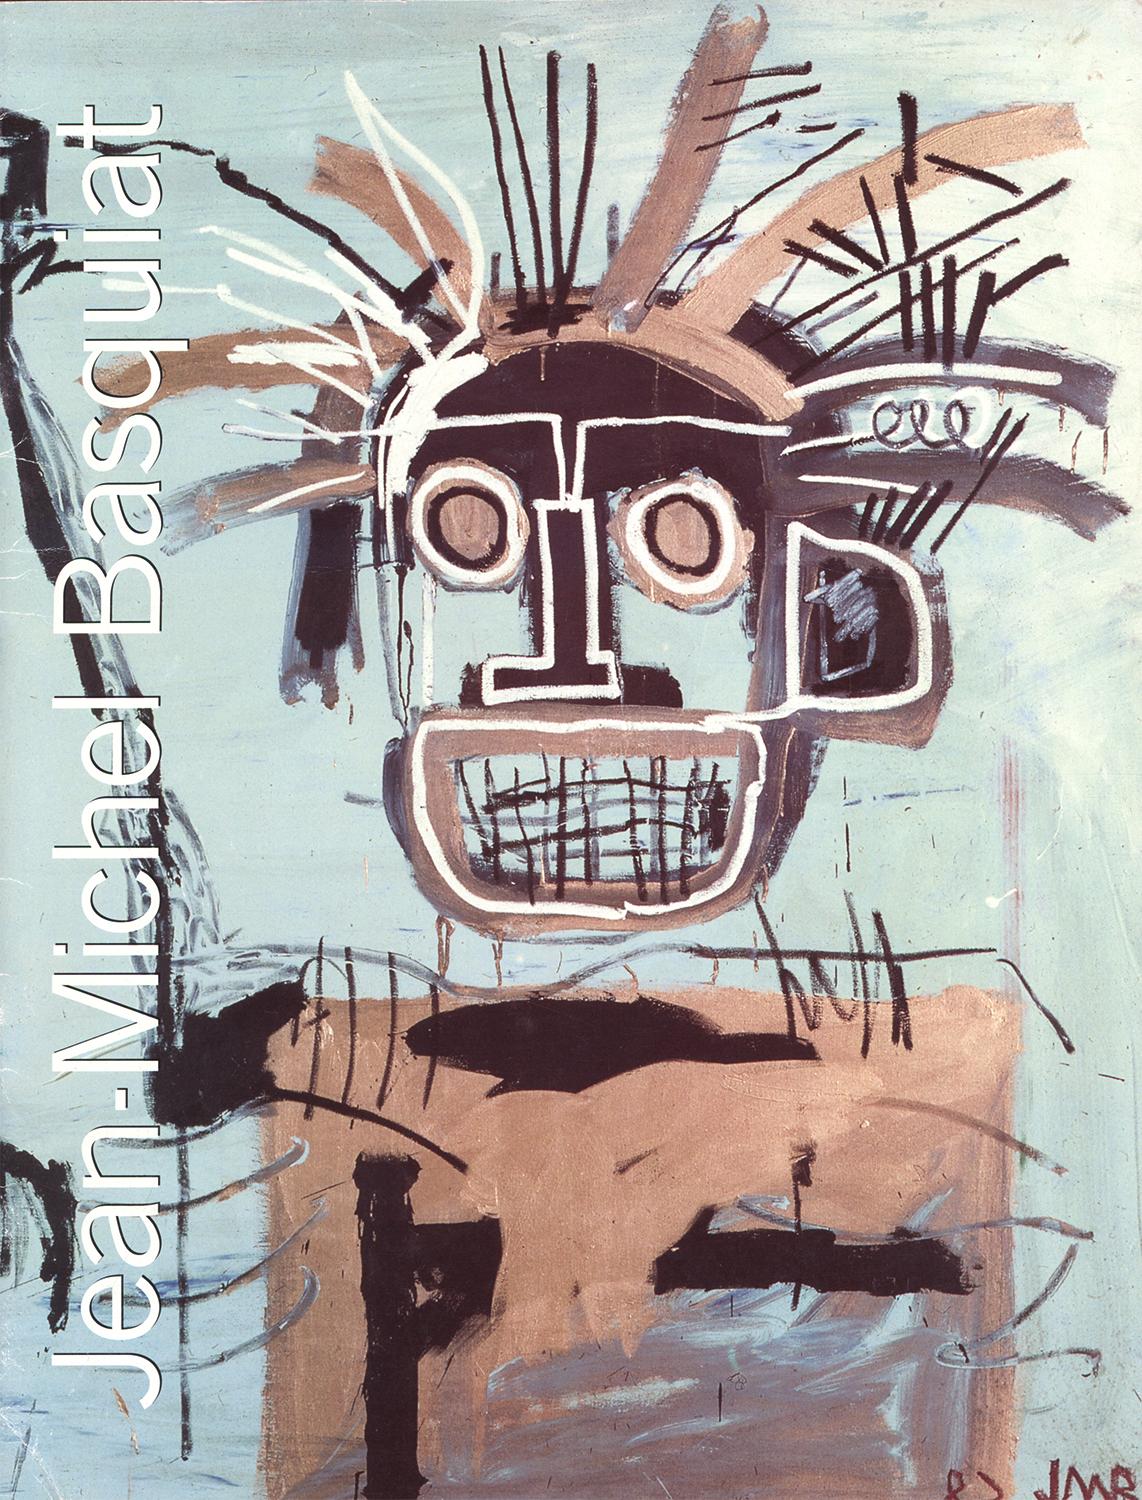 after Jean-Michel Basquiat Abstract Print - Basquiat Serpentine Gallery London 1996 (Exhibition Catalogue)